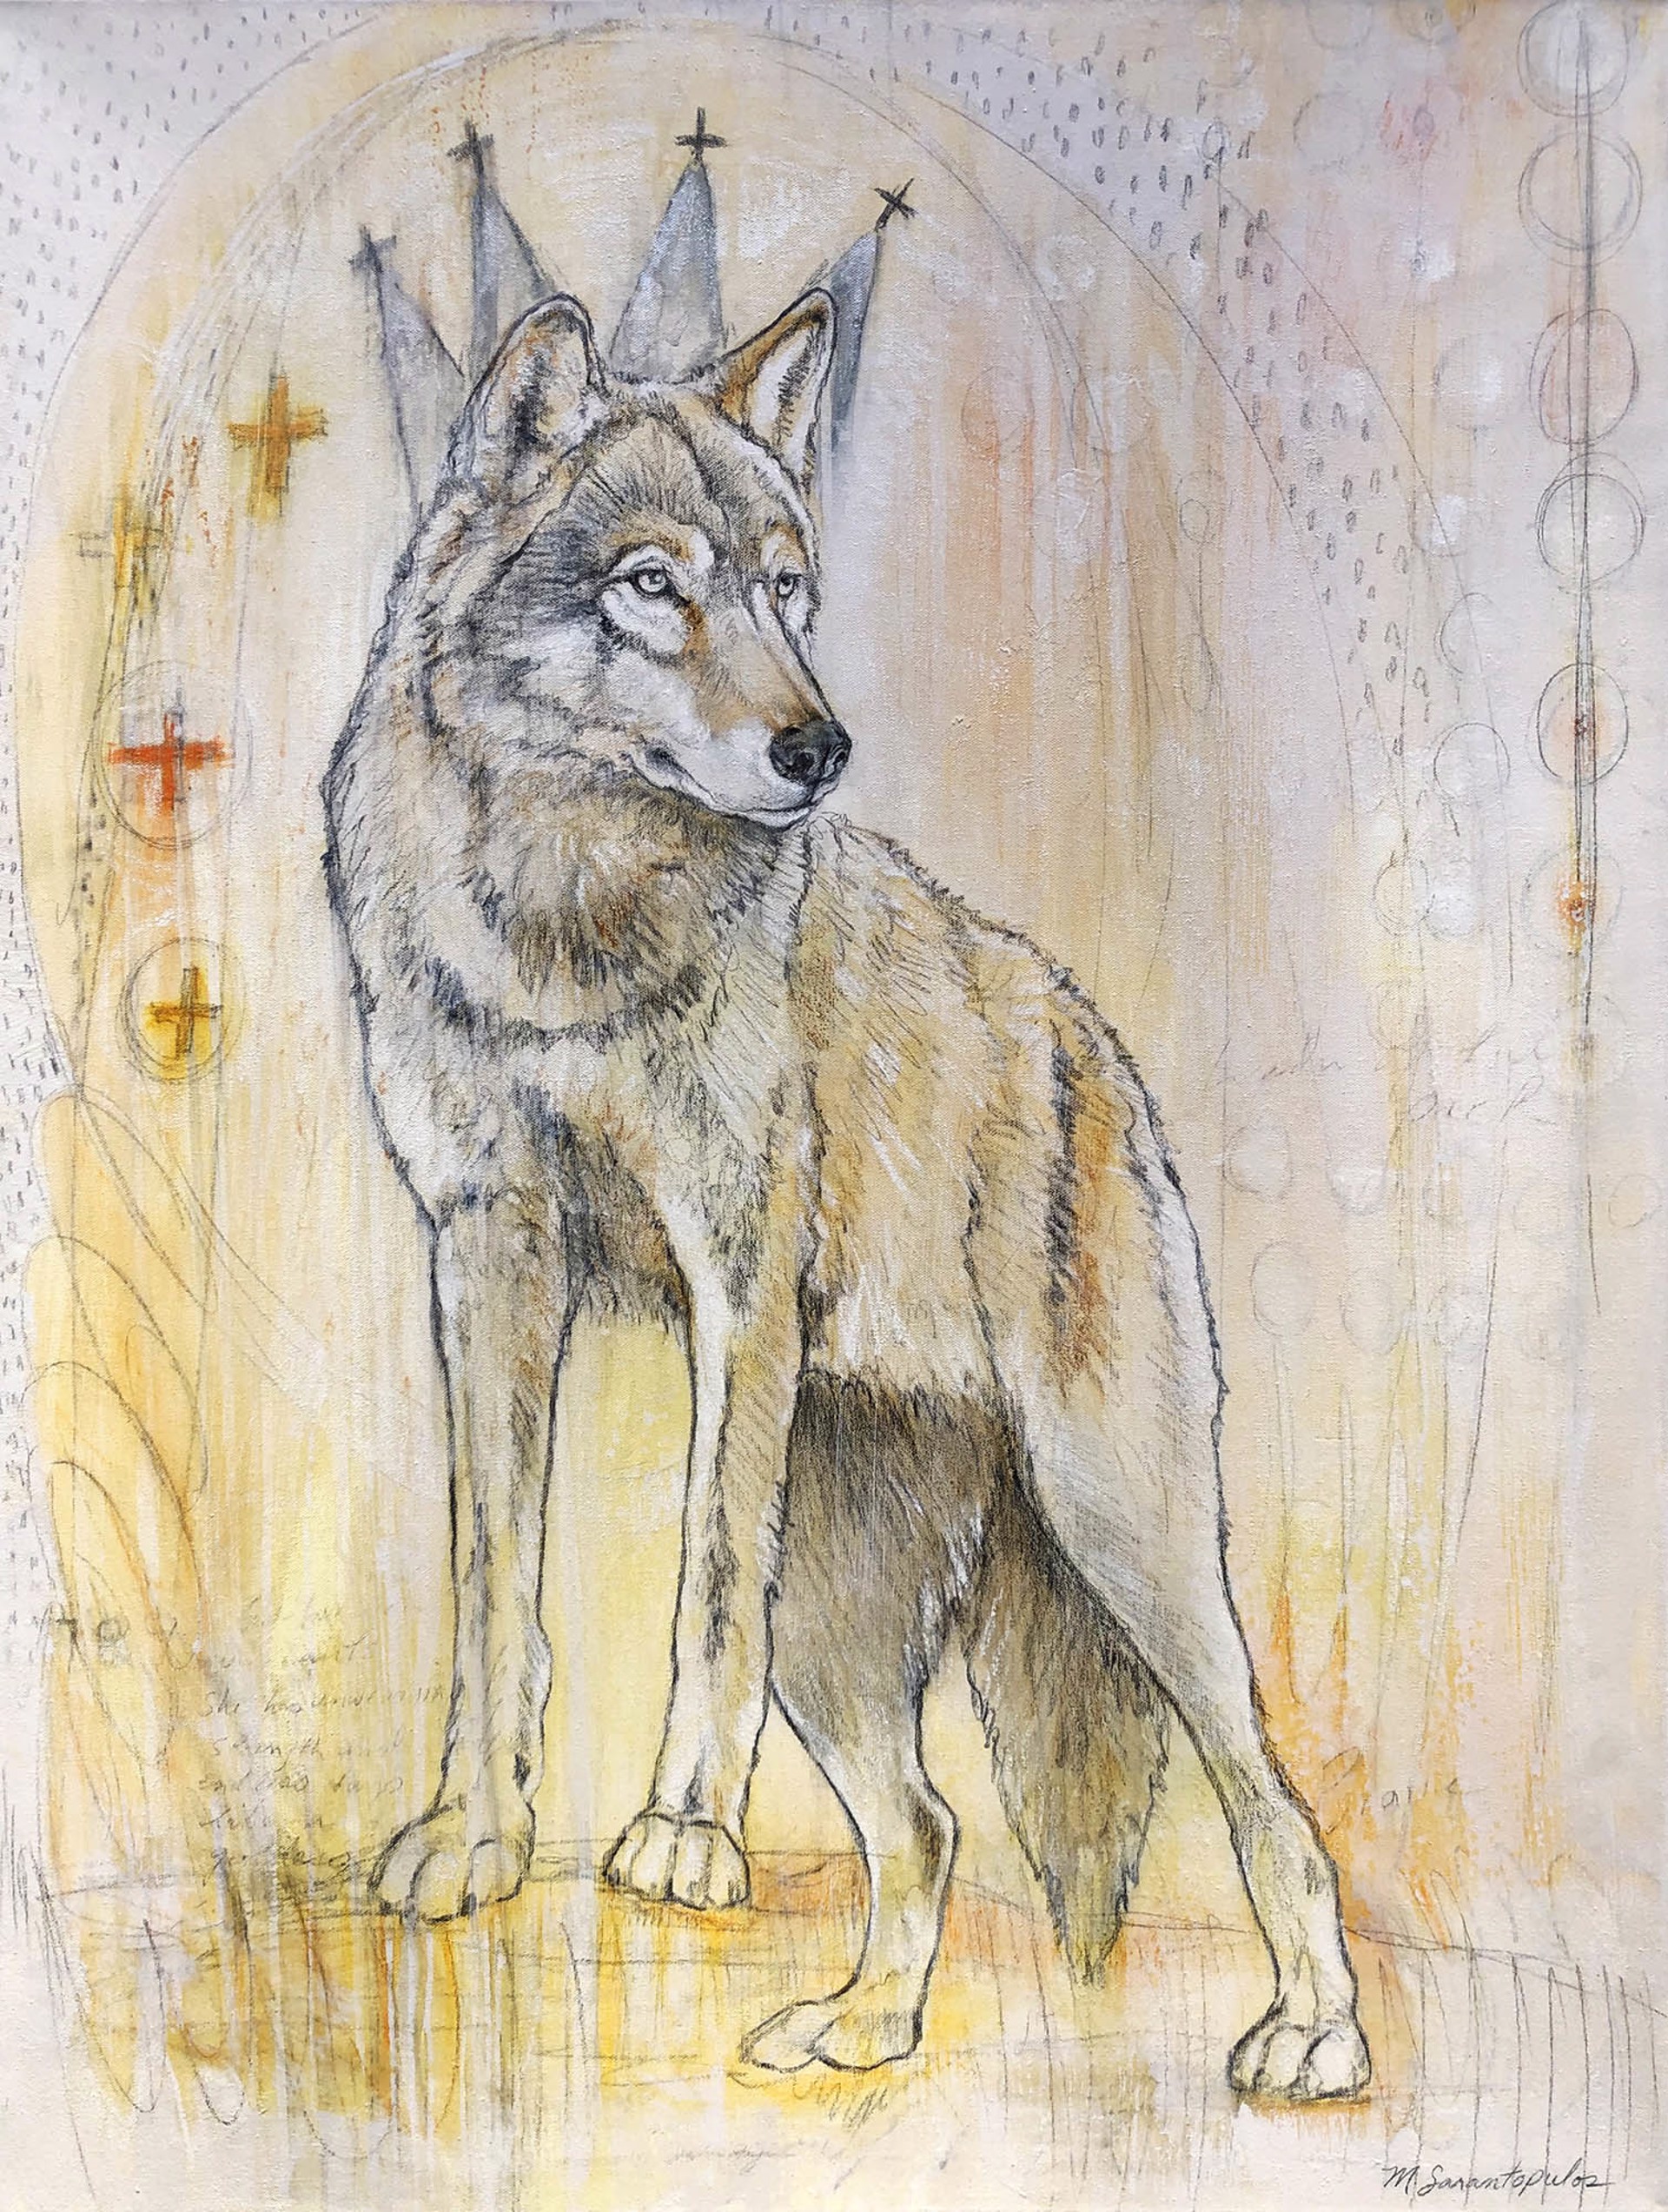 Original Mixed Media Painting Featuring A Wolf Drawn In Graphite With Doodle Crown And Details Over Yellow And Gray Abstract Background